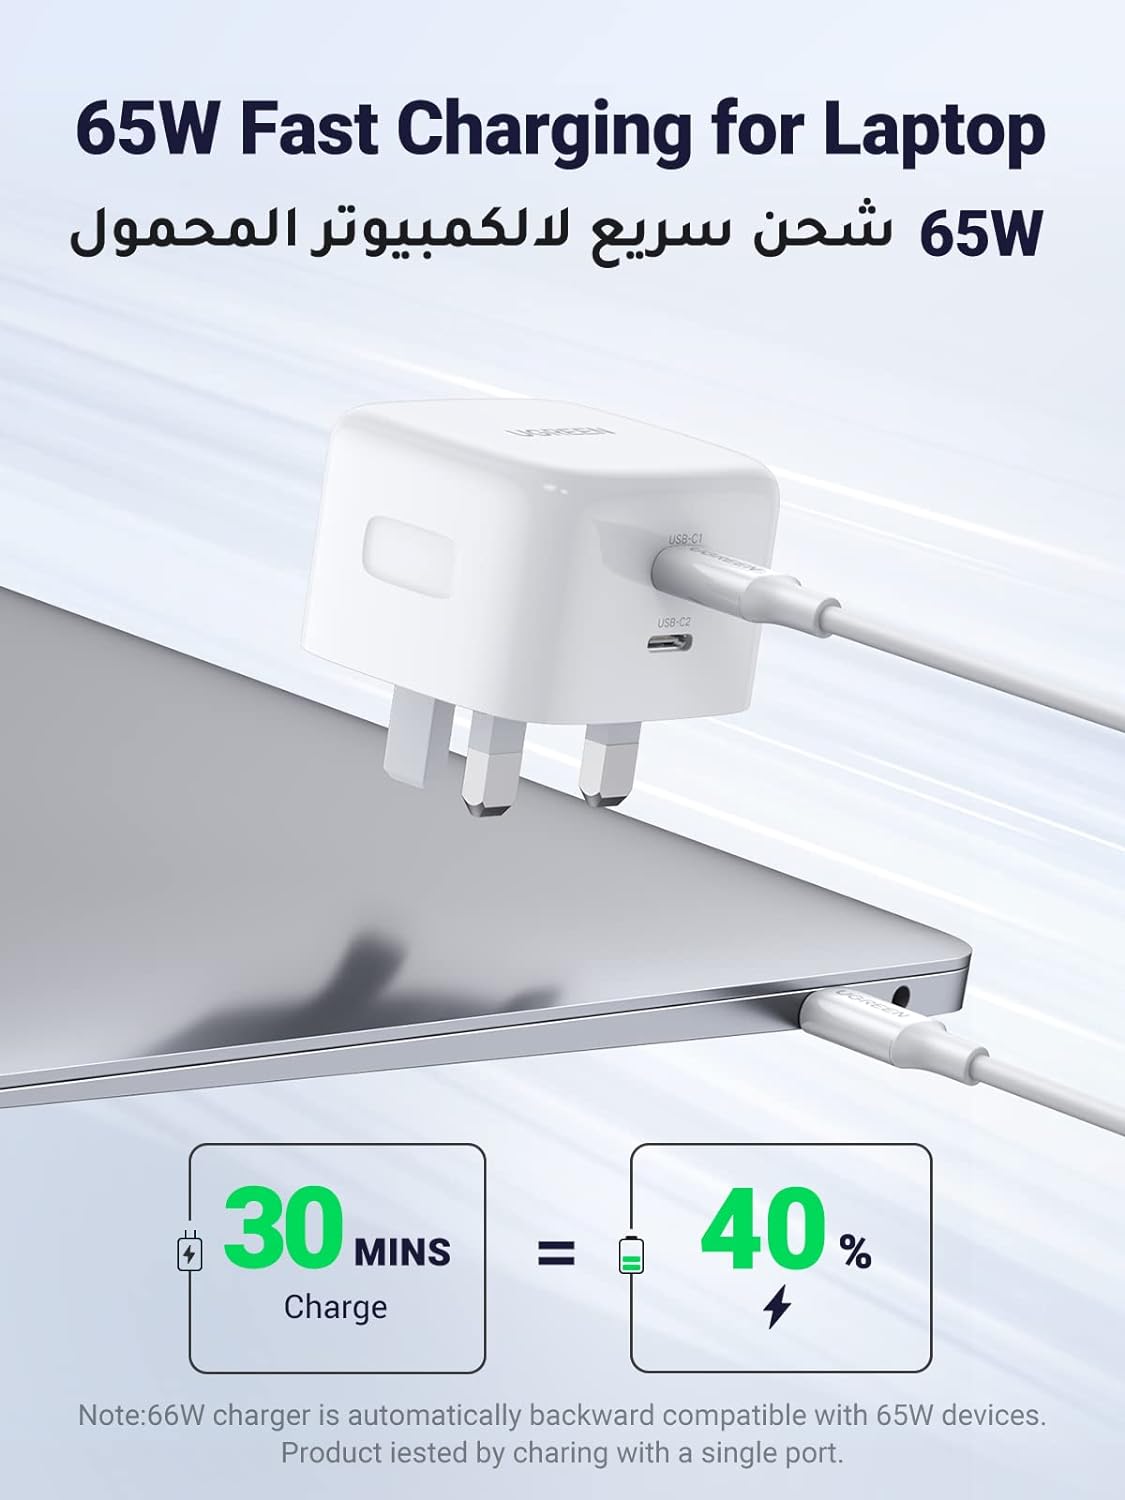 UGREEN 65W USB C PD Charger, GaN Charger Dual Type C Wall Charger Plug, USB Power Adapter Compatible with Macbook, iPhone, iPad, XPS, Matebook, Lenovo, Steam Deck, HP, Asus, Acer, and More Laptops